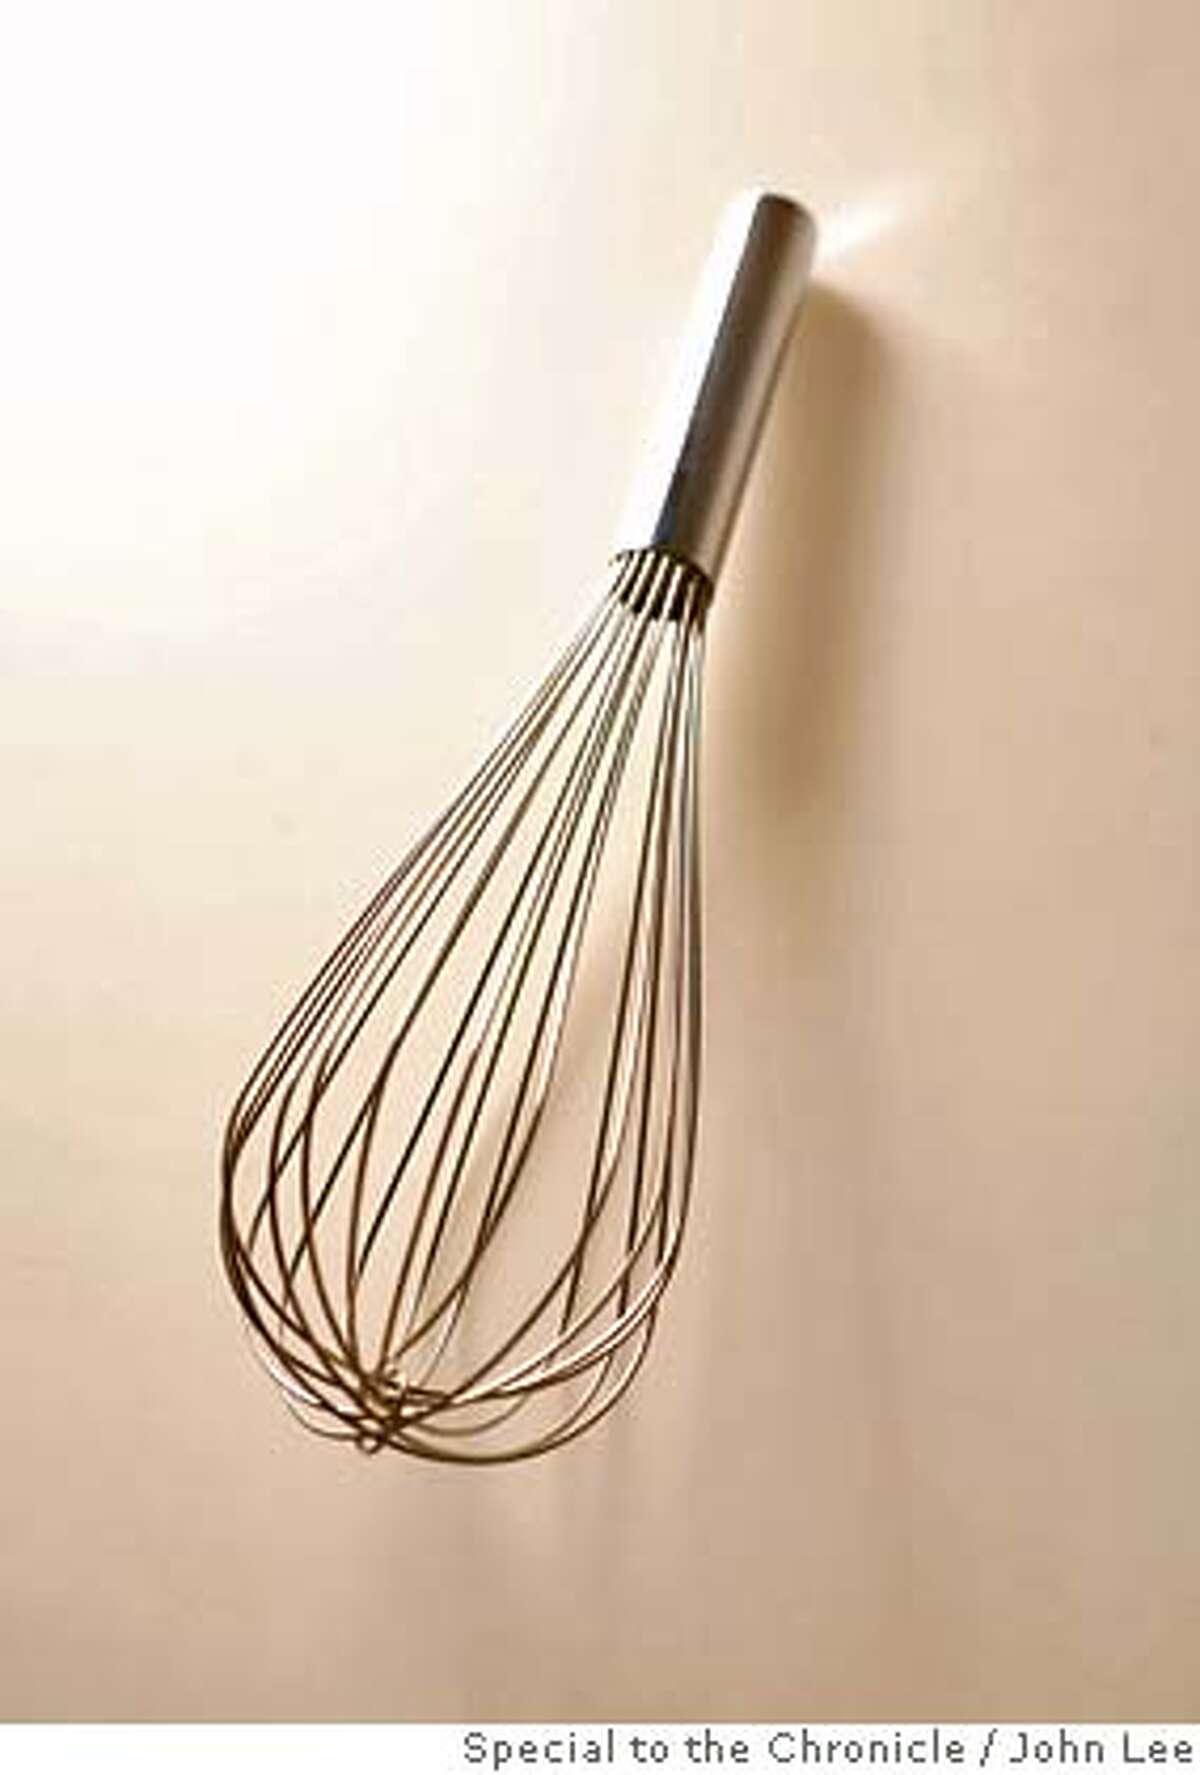 ###Live Caption:WHATS_WHISK_02_JOHNLEE.JPG APRIL 24, 2008: French balloon wire whisk. BY JOHN LEE / SPECIAL TO THE CHRONICLE###Caption History:WHATS_WHISK_02_JOHNLEE.JPG APRIL 24, 2008: French balloon wire whisk. BY JOHN LEE / SPECIAL TO THE CHRONICLE###Notes:###Special Instructions: